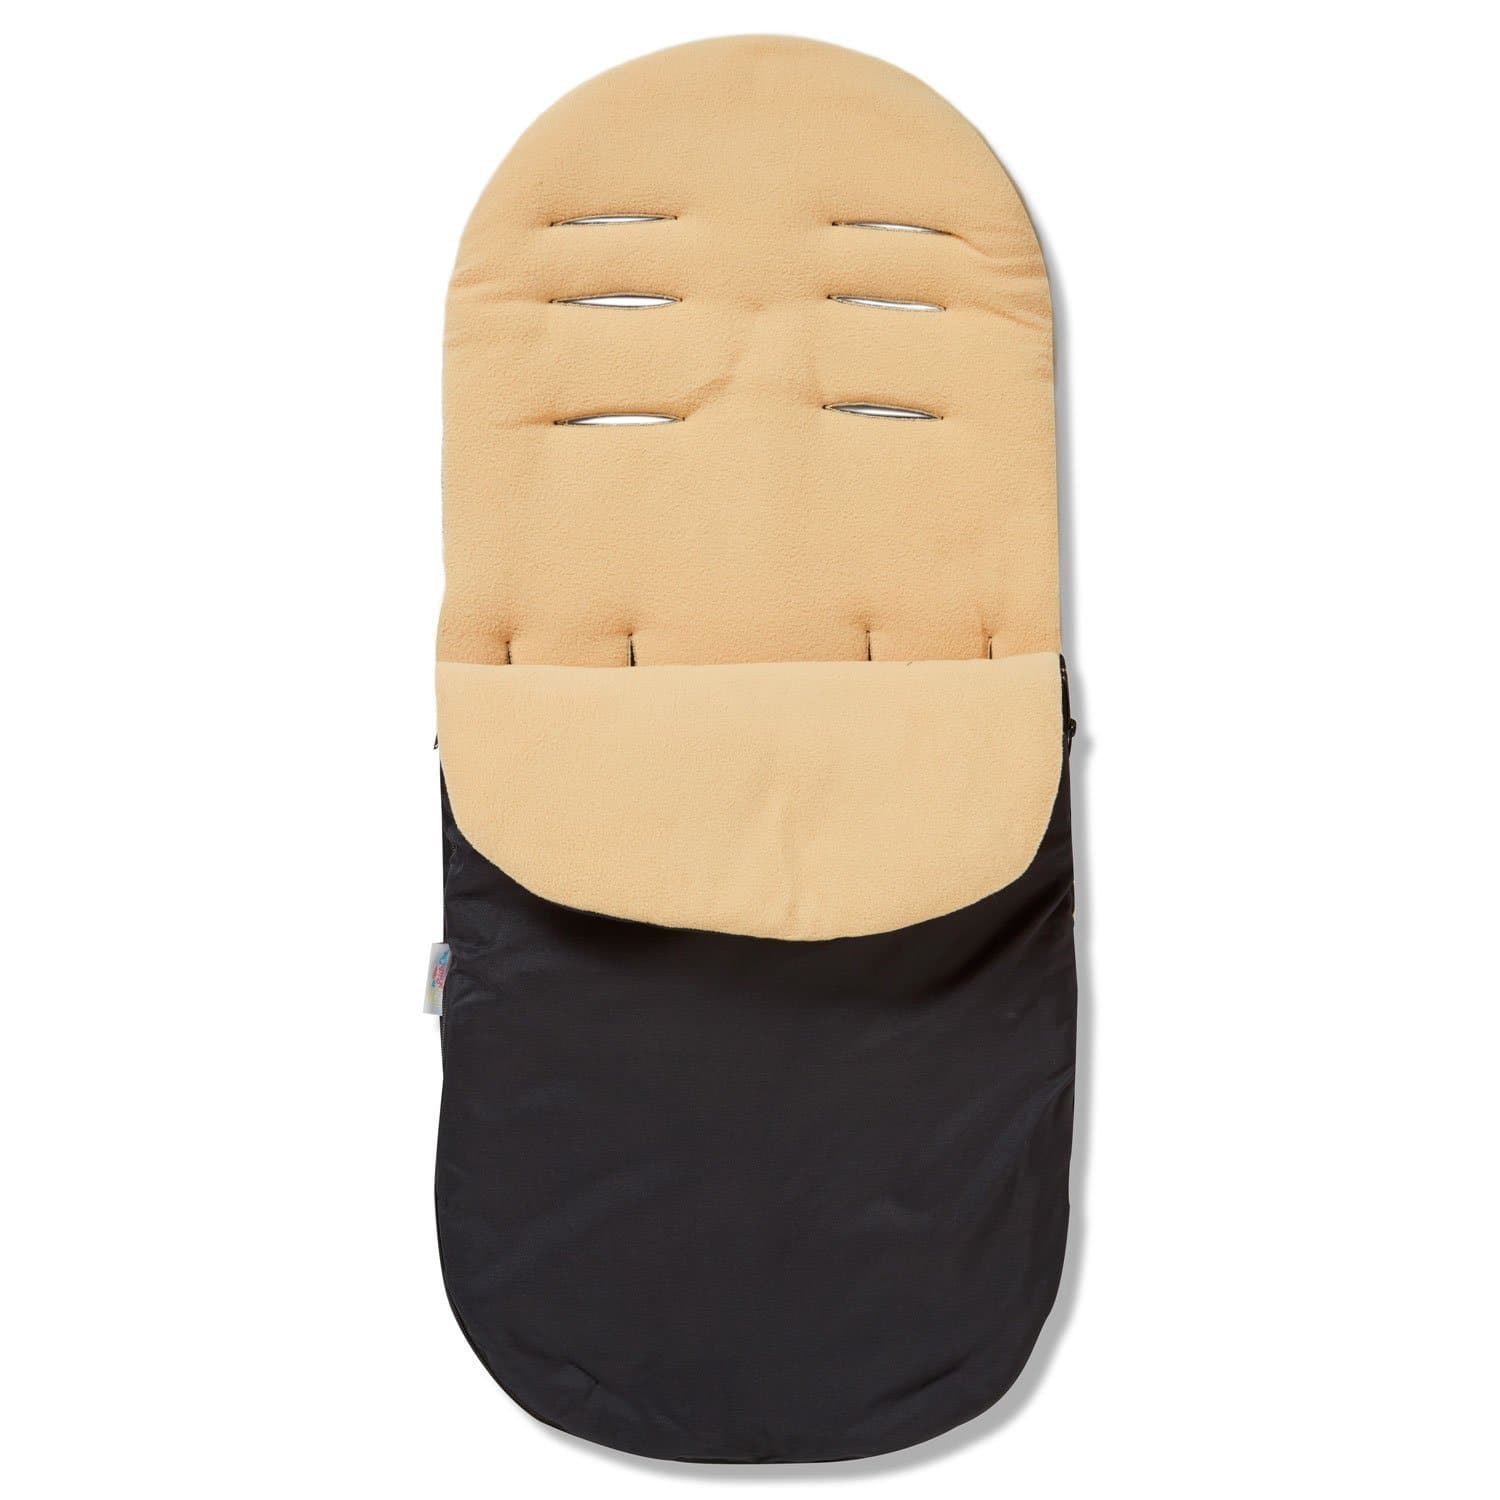 Footmuff / Cosy Toes Compatible with Kinderkraft - Sand / Fits All Models | For Your Little One